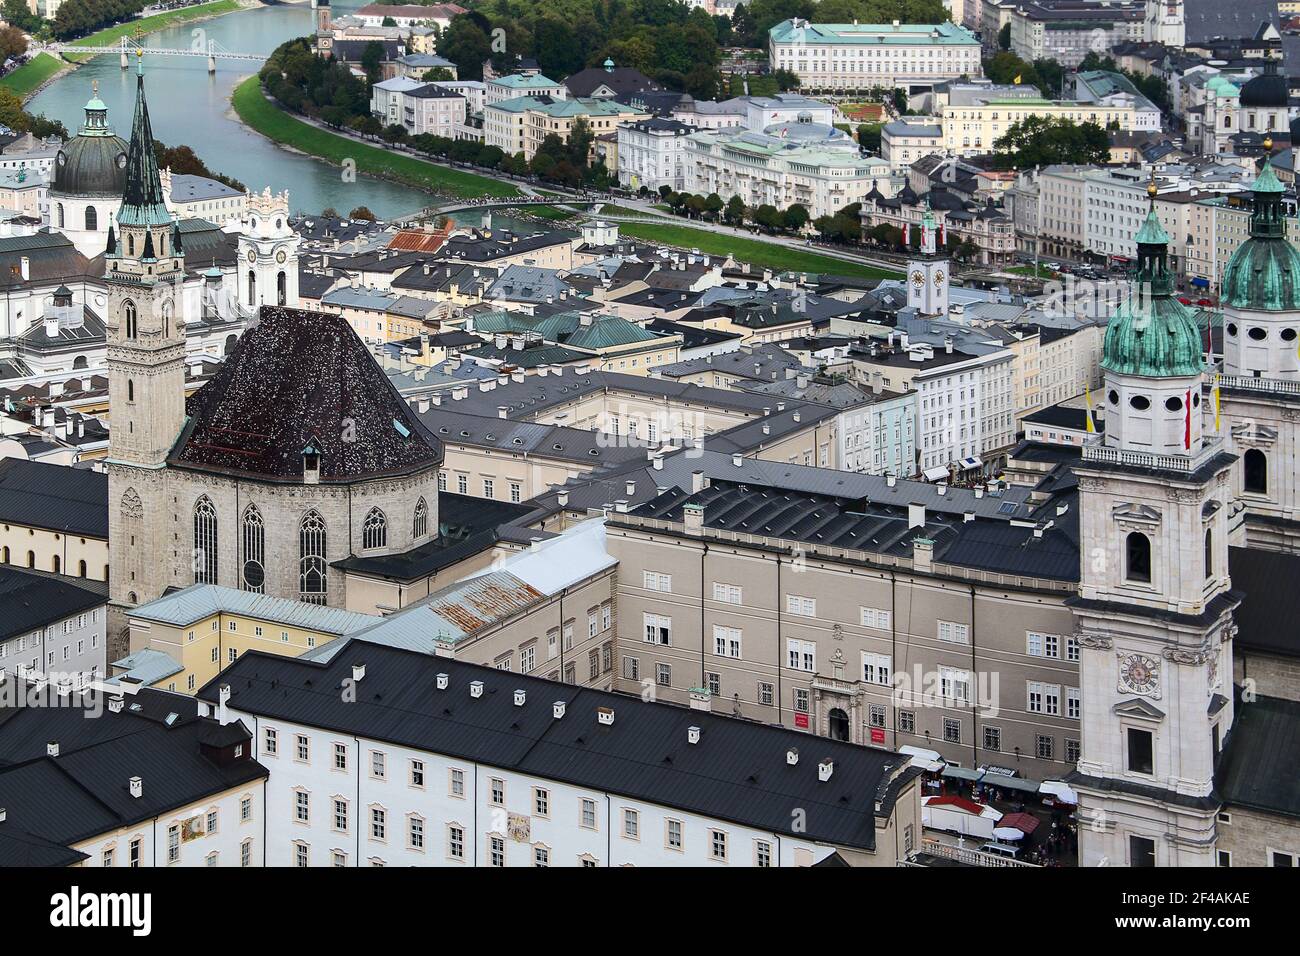 Scenic view of the city of Salsburg from a bird's eye view. In the background is the Danube River Stock Photo